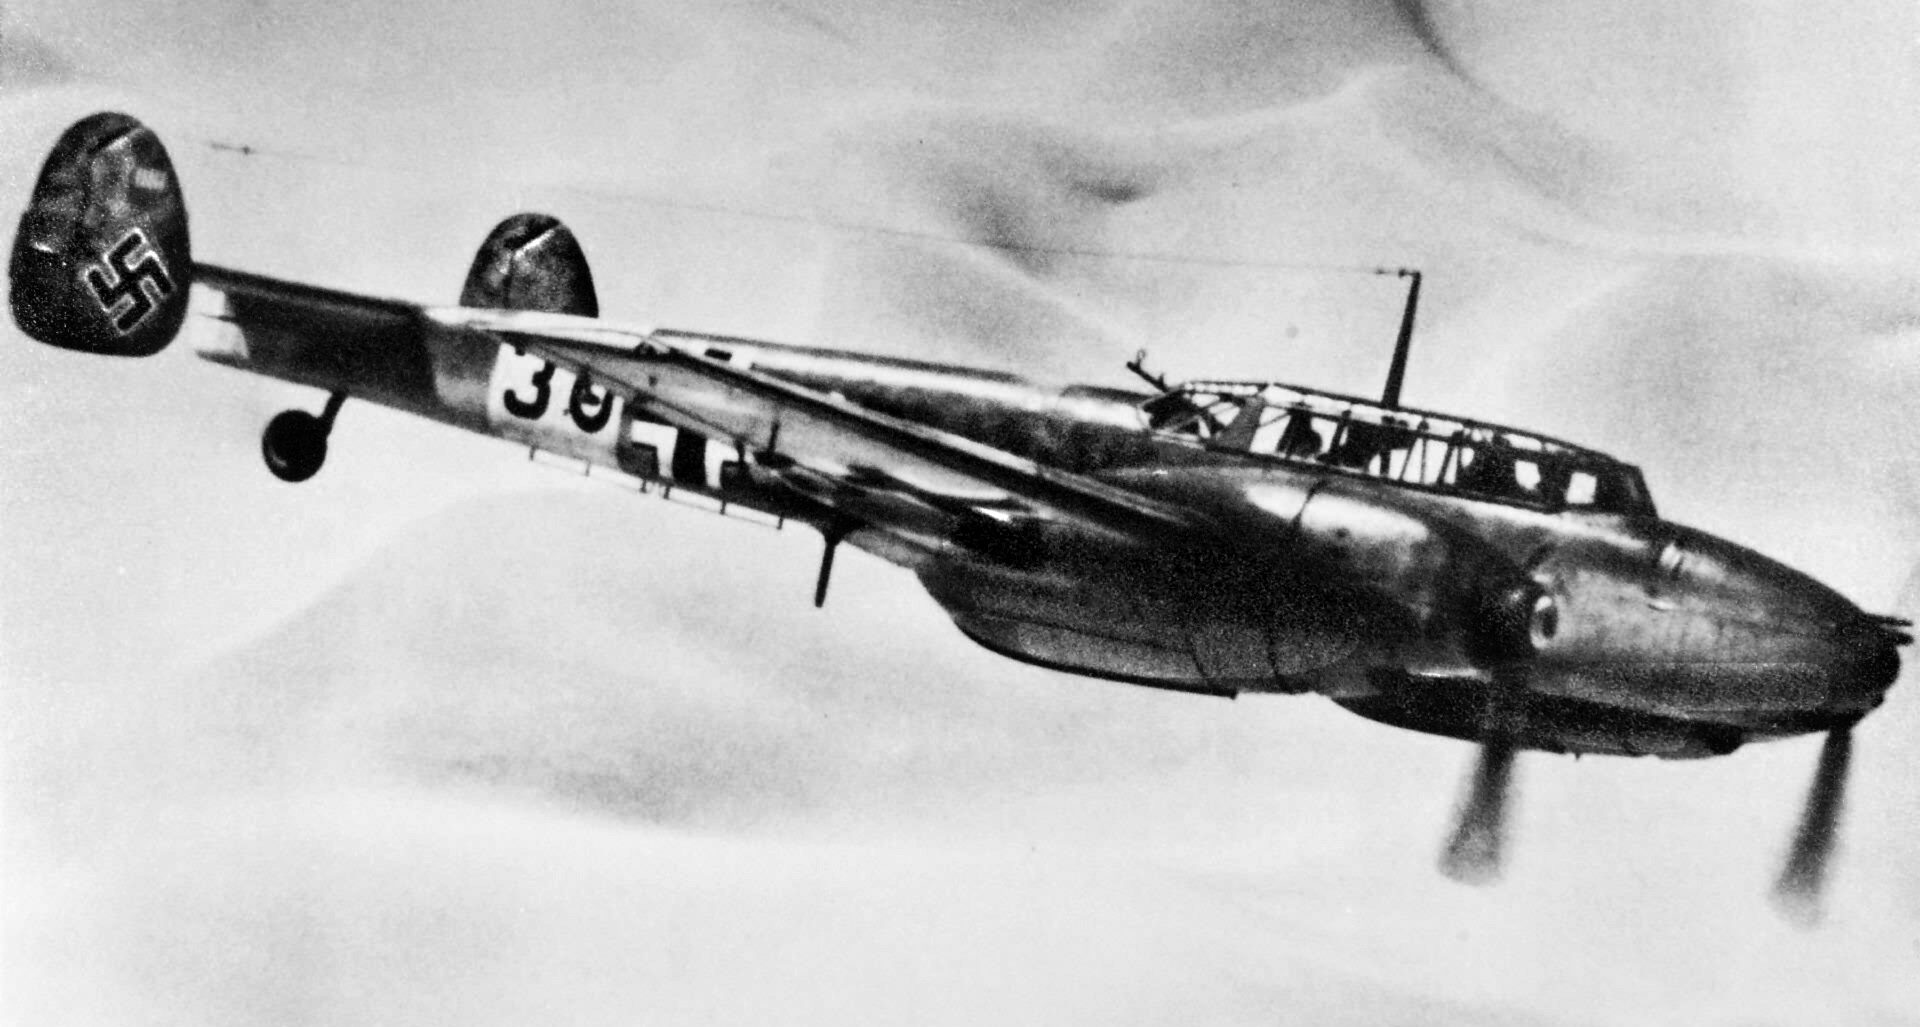 The twin-engine Bf 110 served with noteworthy success in the Luftwaffe's early campaigns in Poland, Norway, and France. 